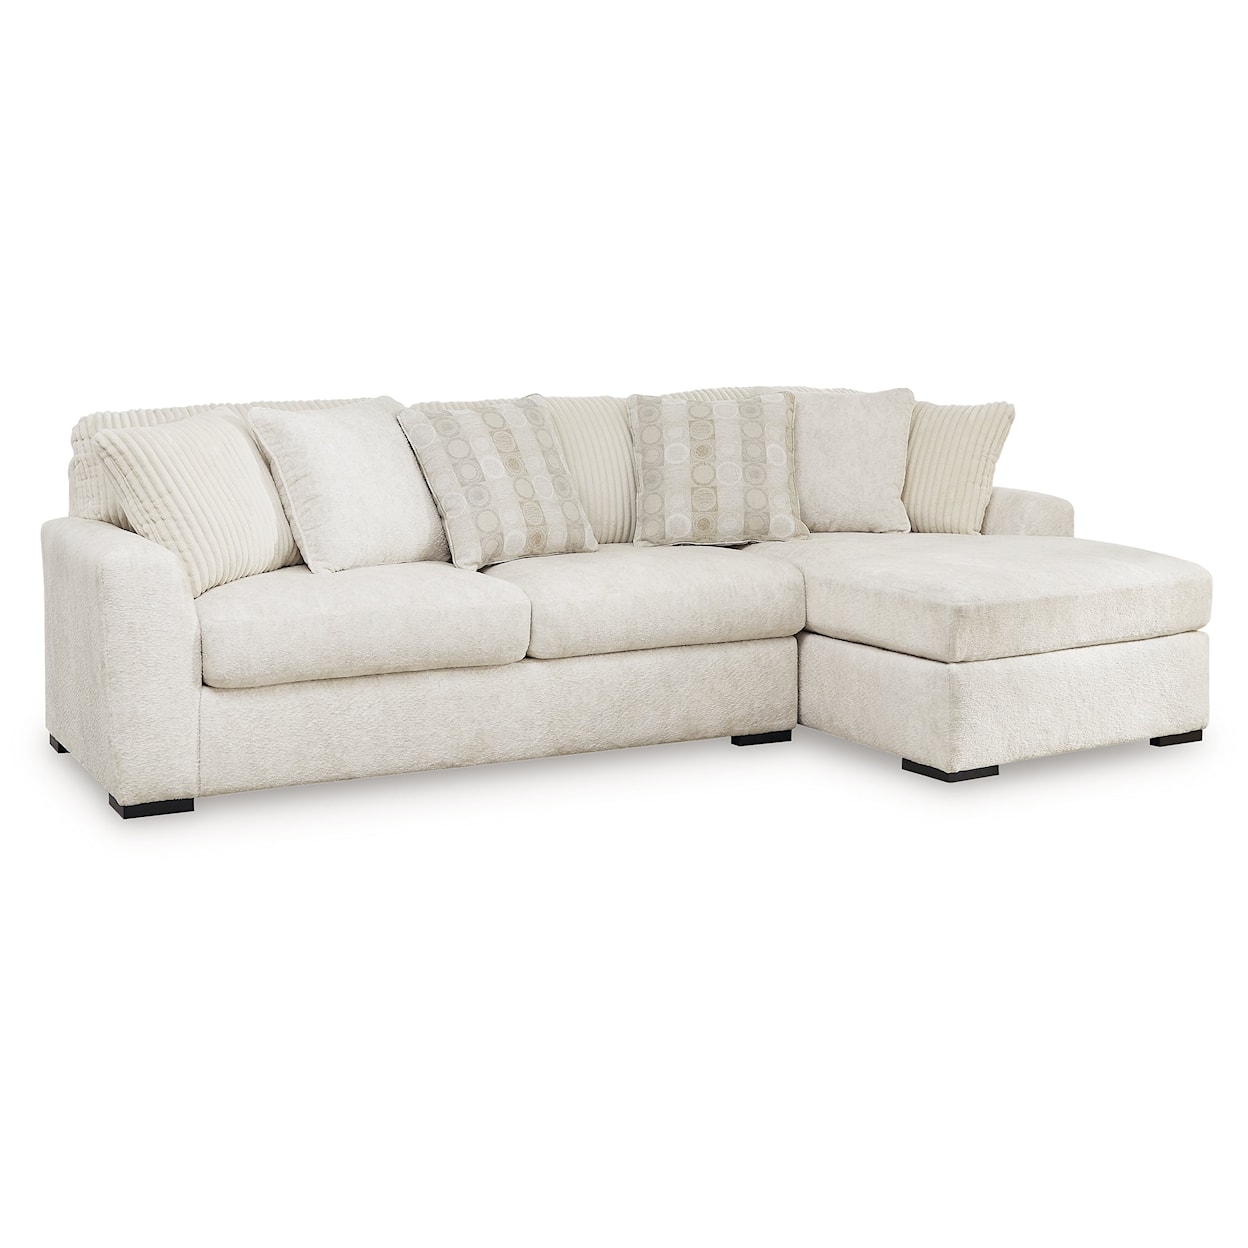 Michael Alan Select Chessington 2-Piece Sectional With Chaise